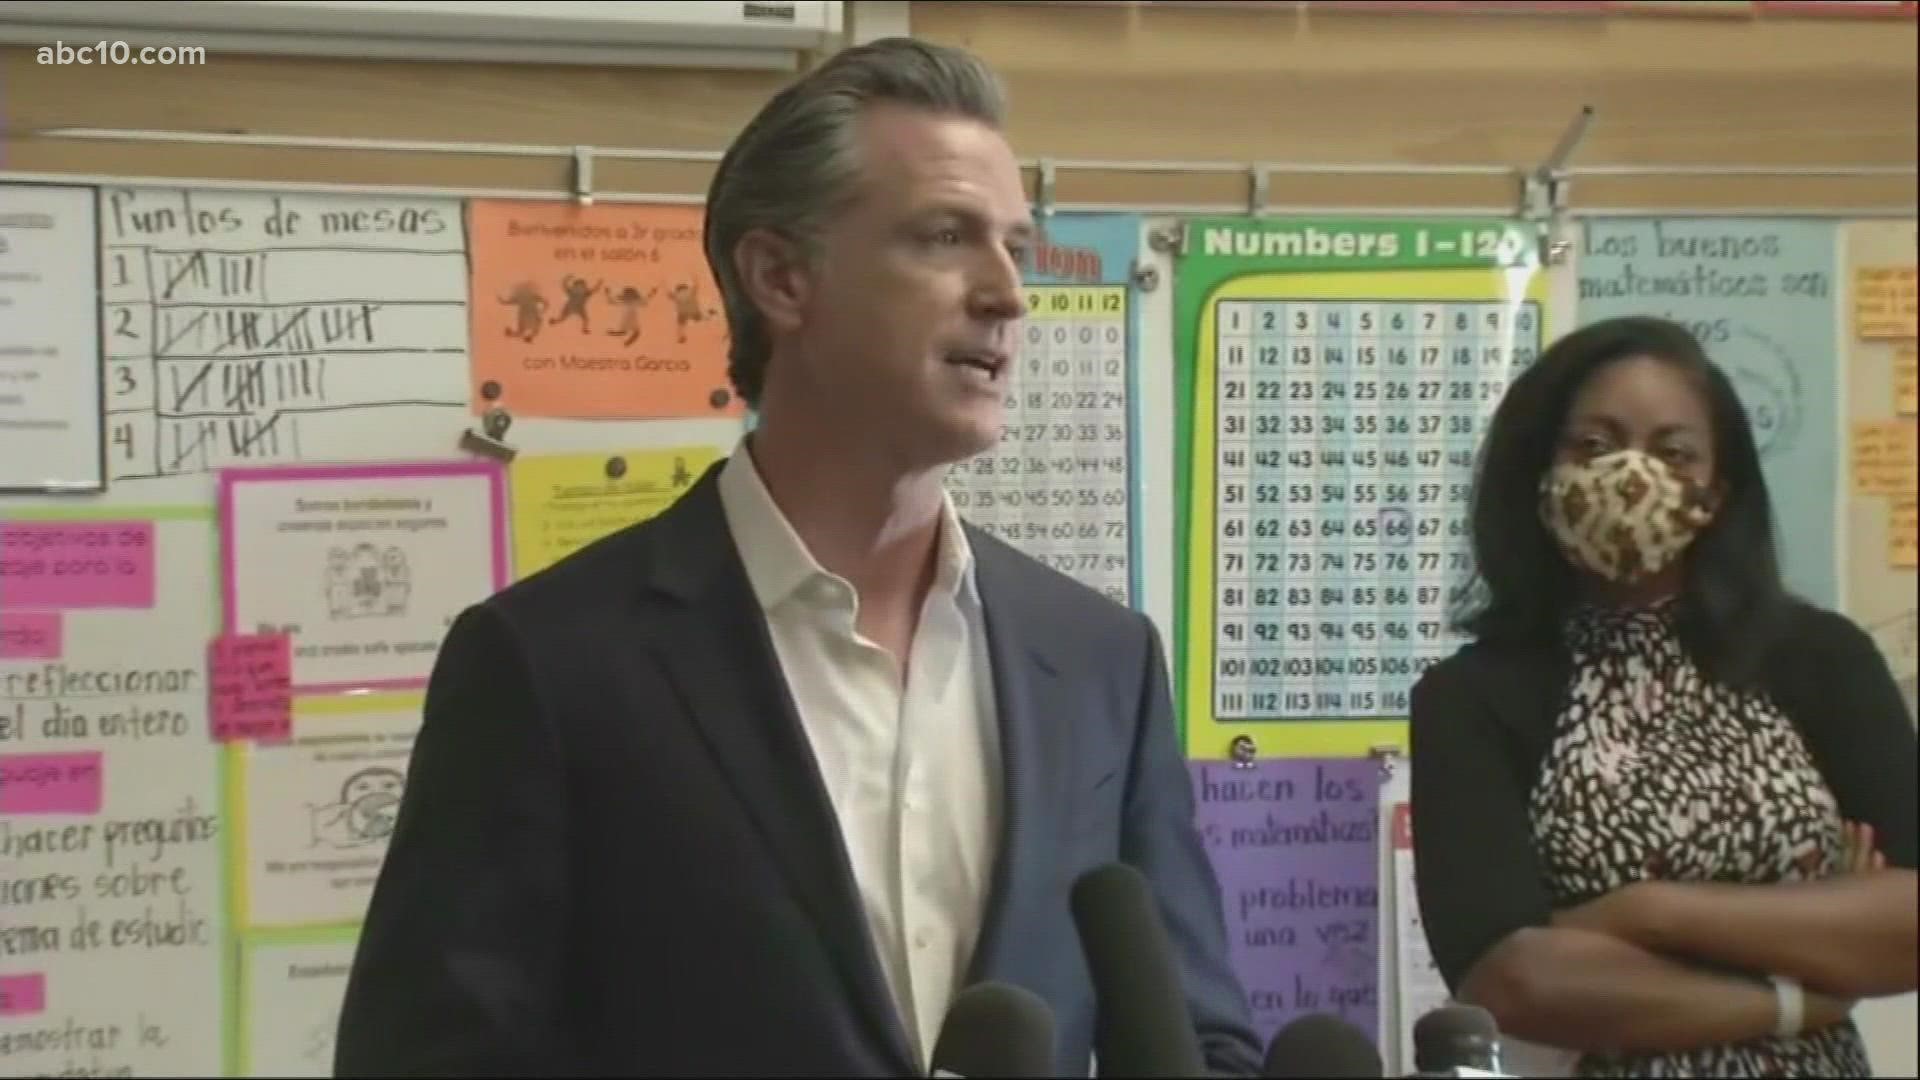 A day after Gov. Newsom defeated the recall effort, he was in Alameda County discussing combating COVID-19 in schools.